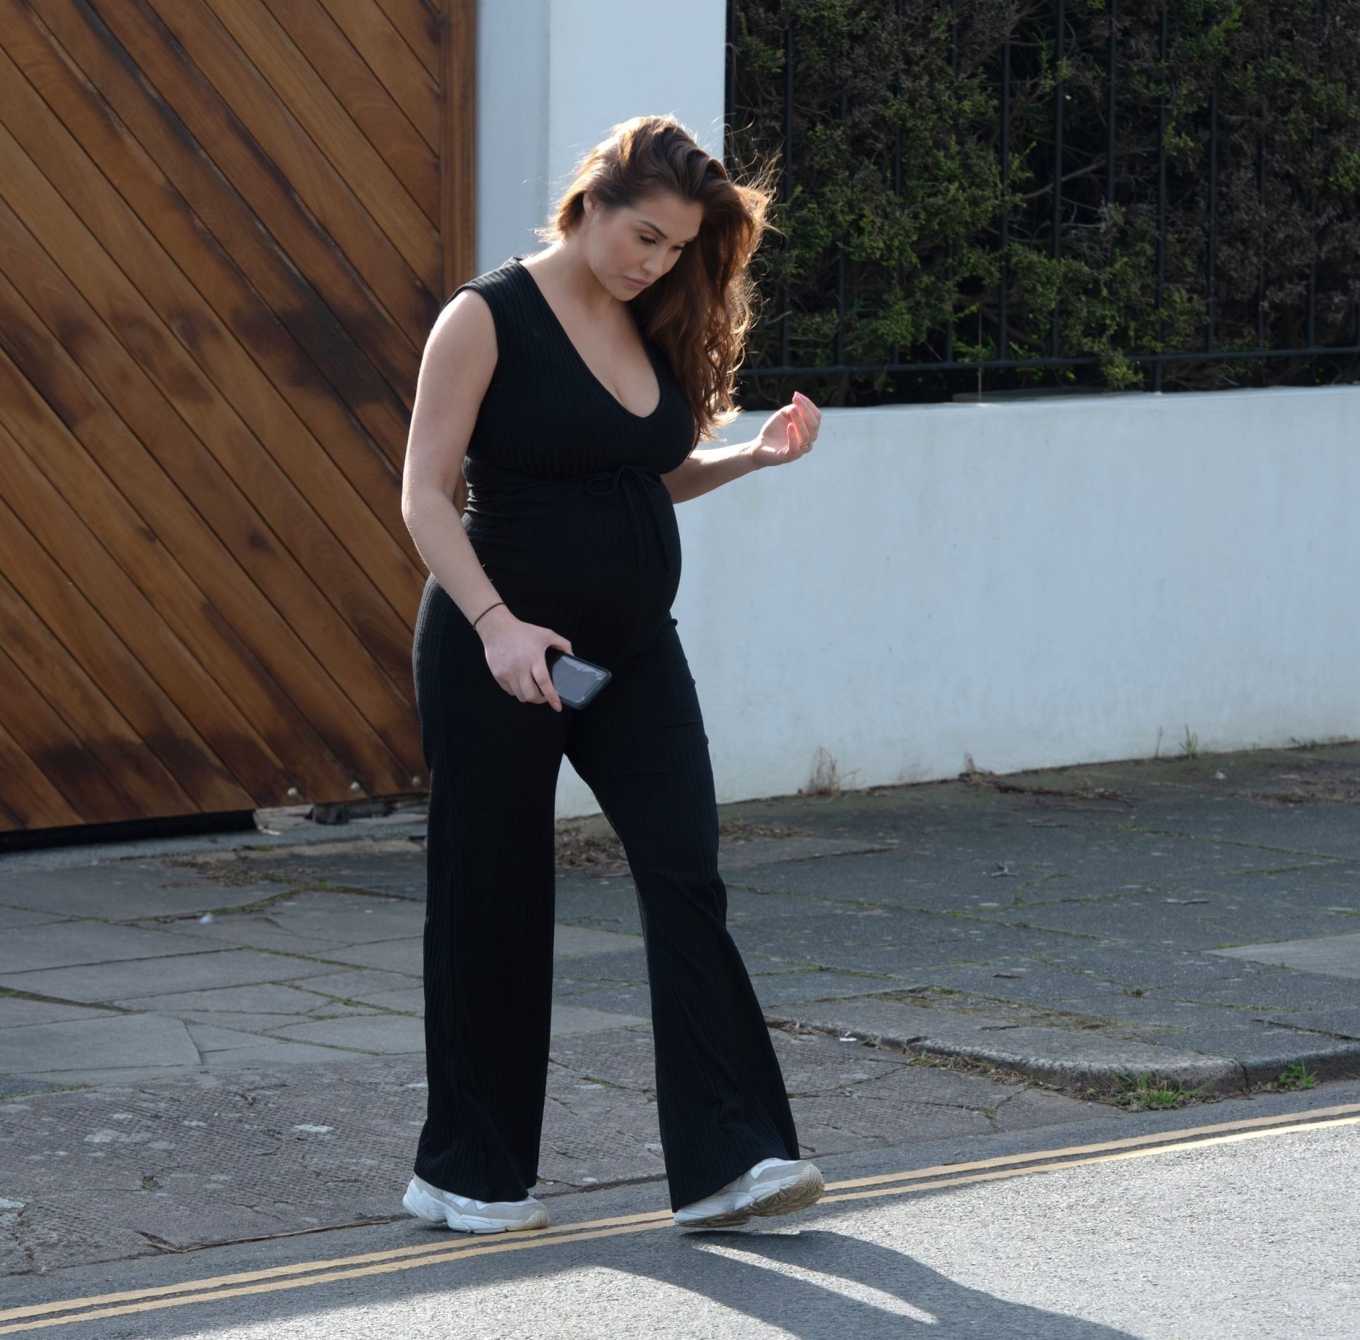 Chloe Goodman â€“ Showing baby bump while out for a morning walk at her home